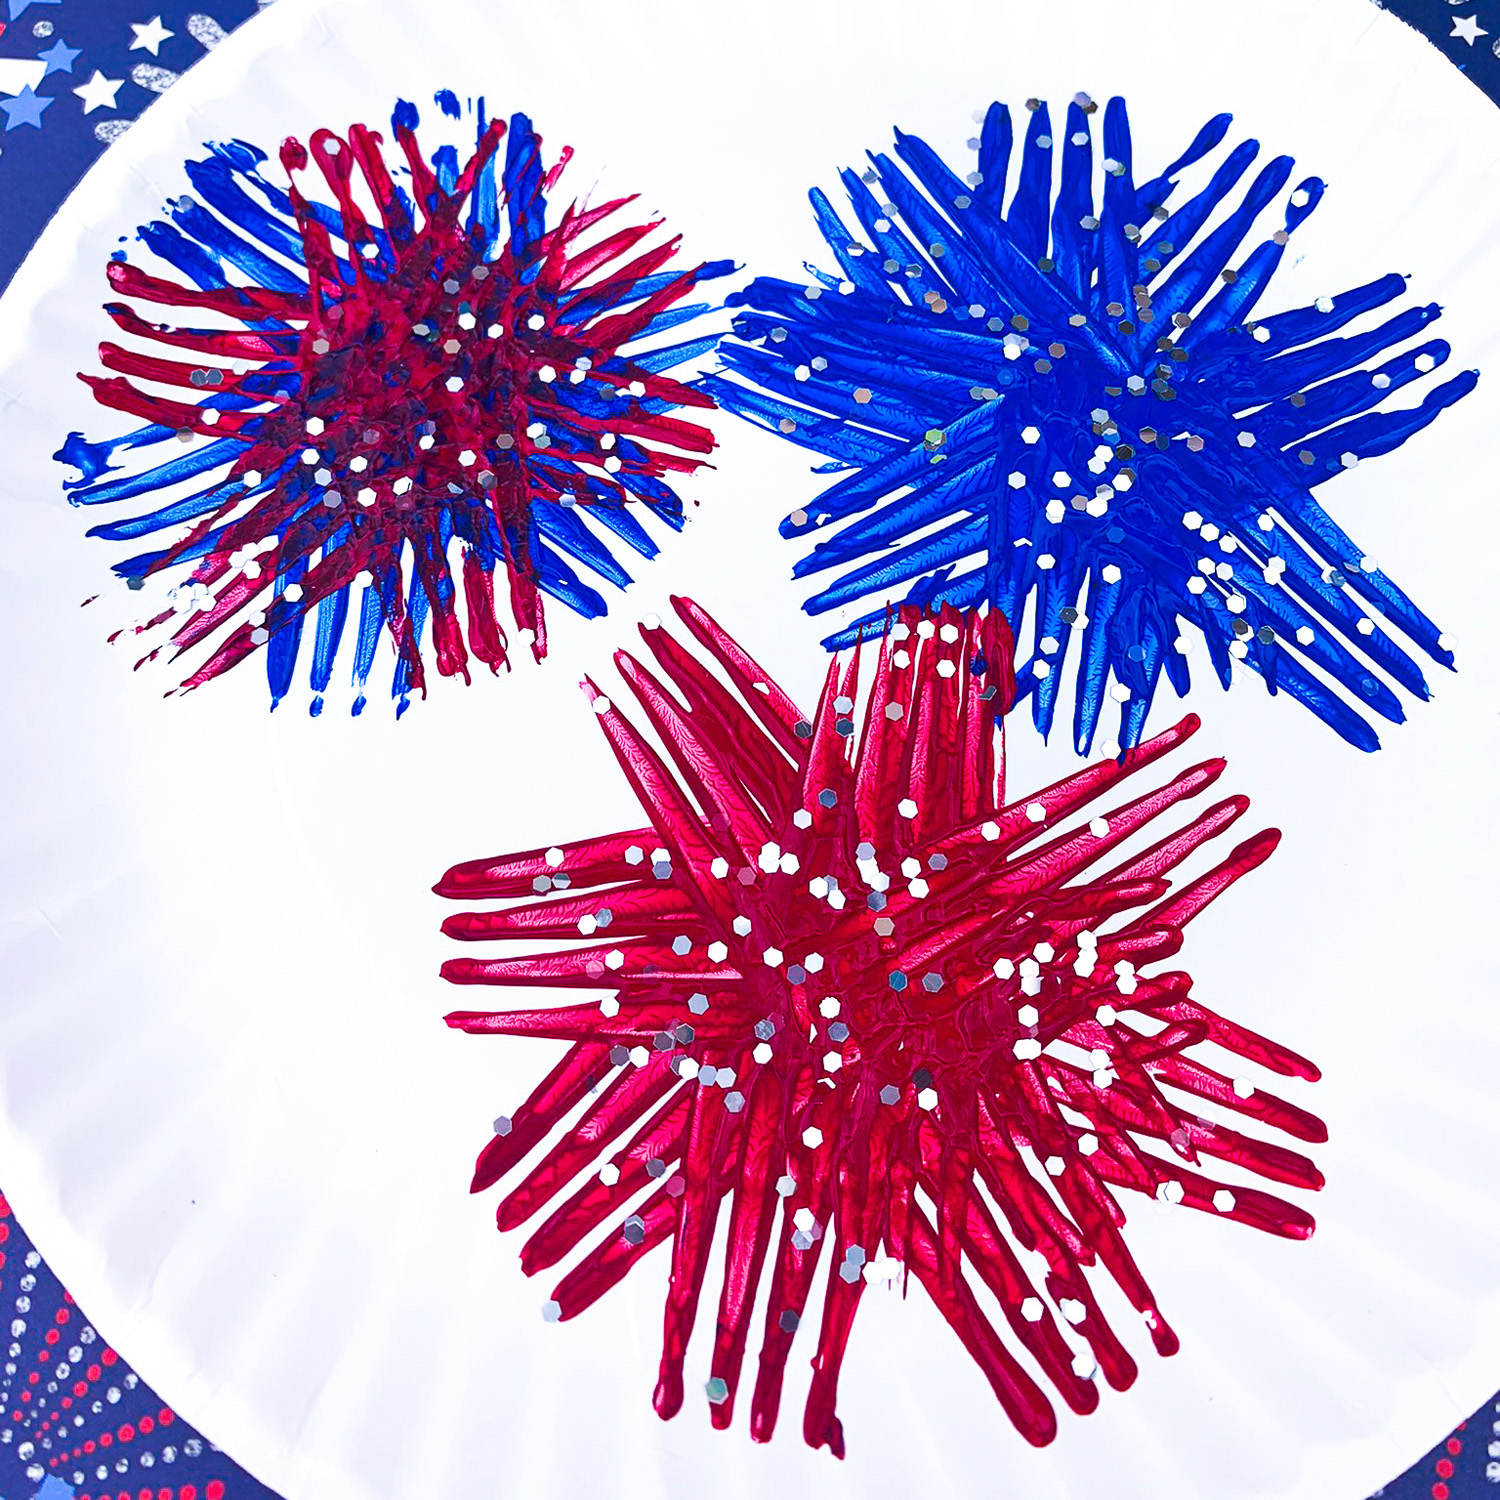 Close up of paper plate fireworks kids craft - fork-painted fireworks on white paper plate